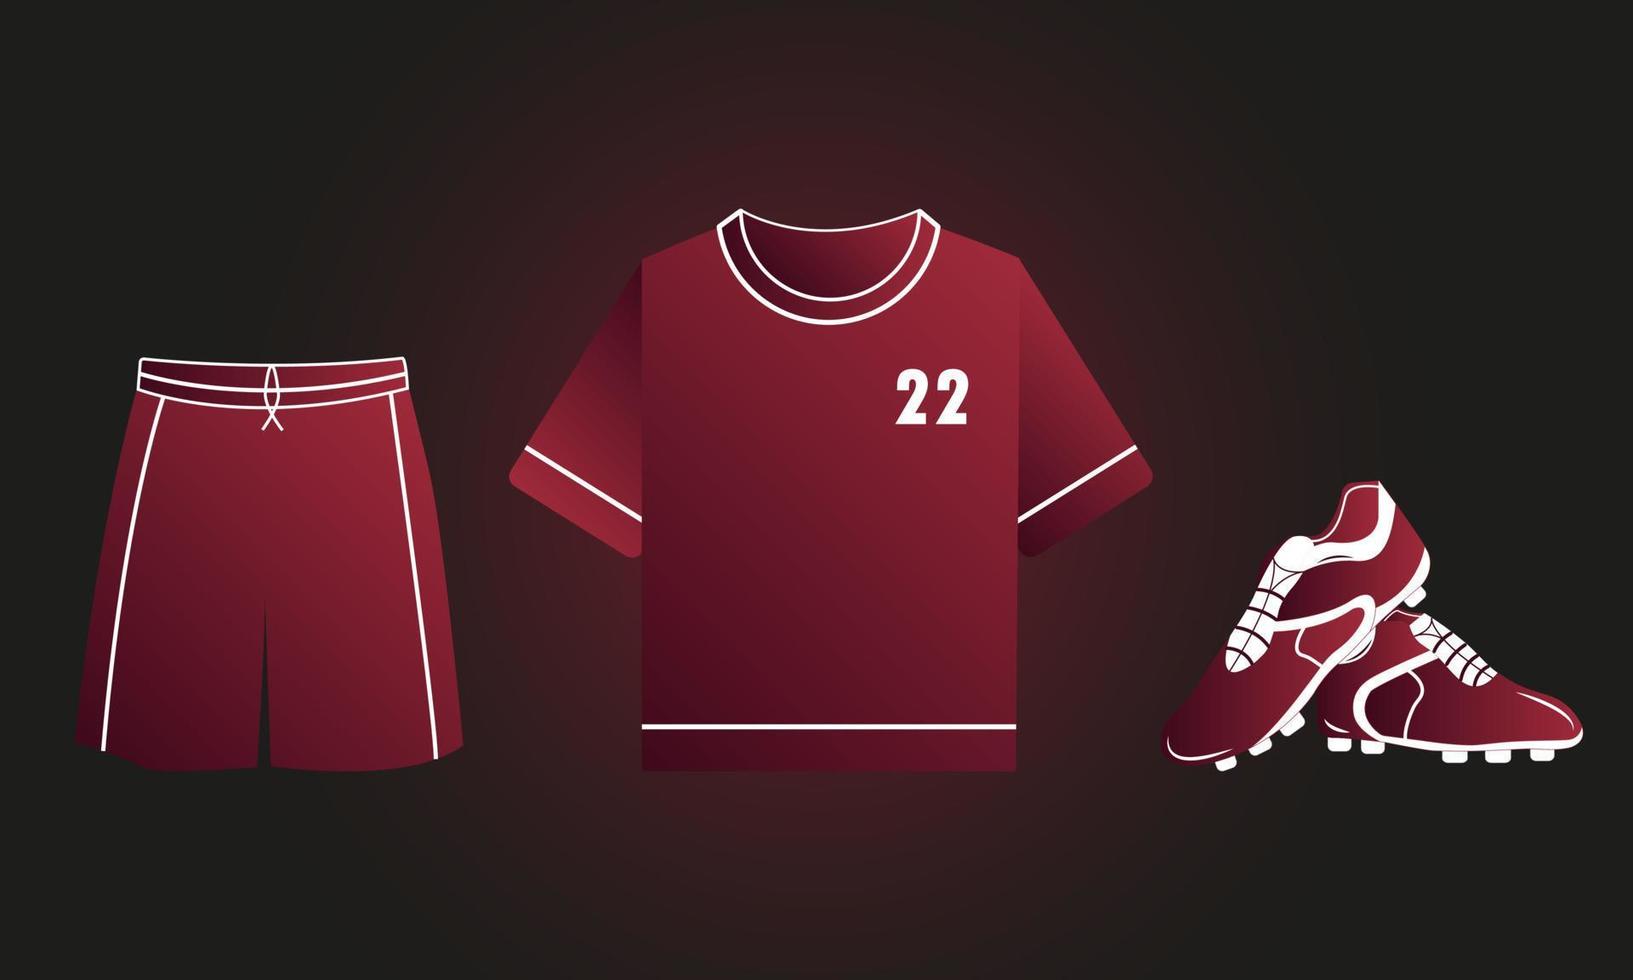 Football attributes of the championship. T-shirt, shorts, boots. Football items in the style of the world championship. vector